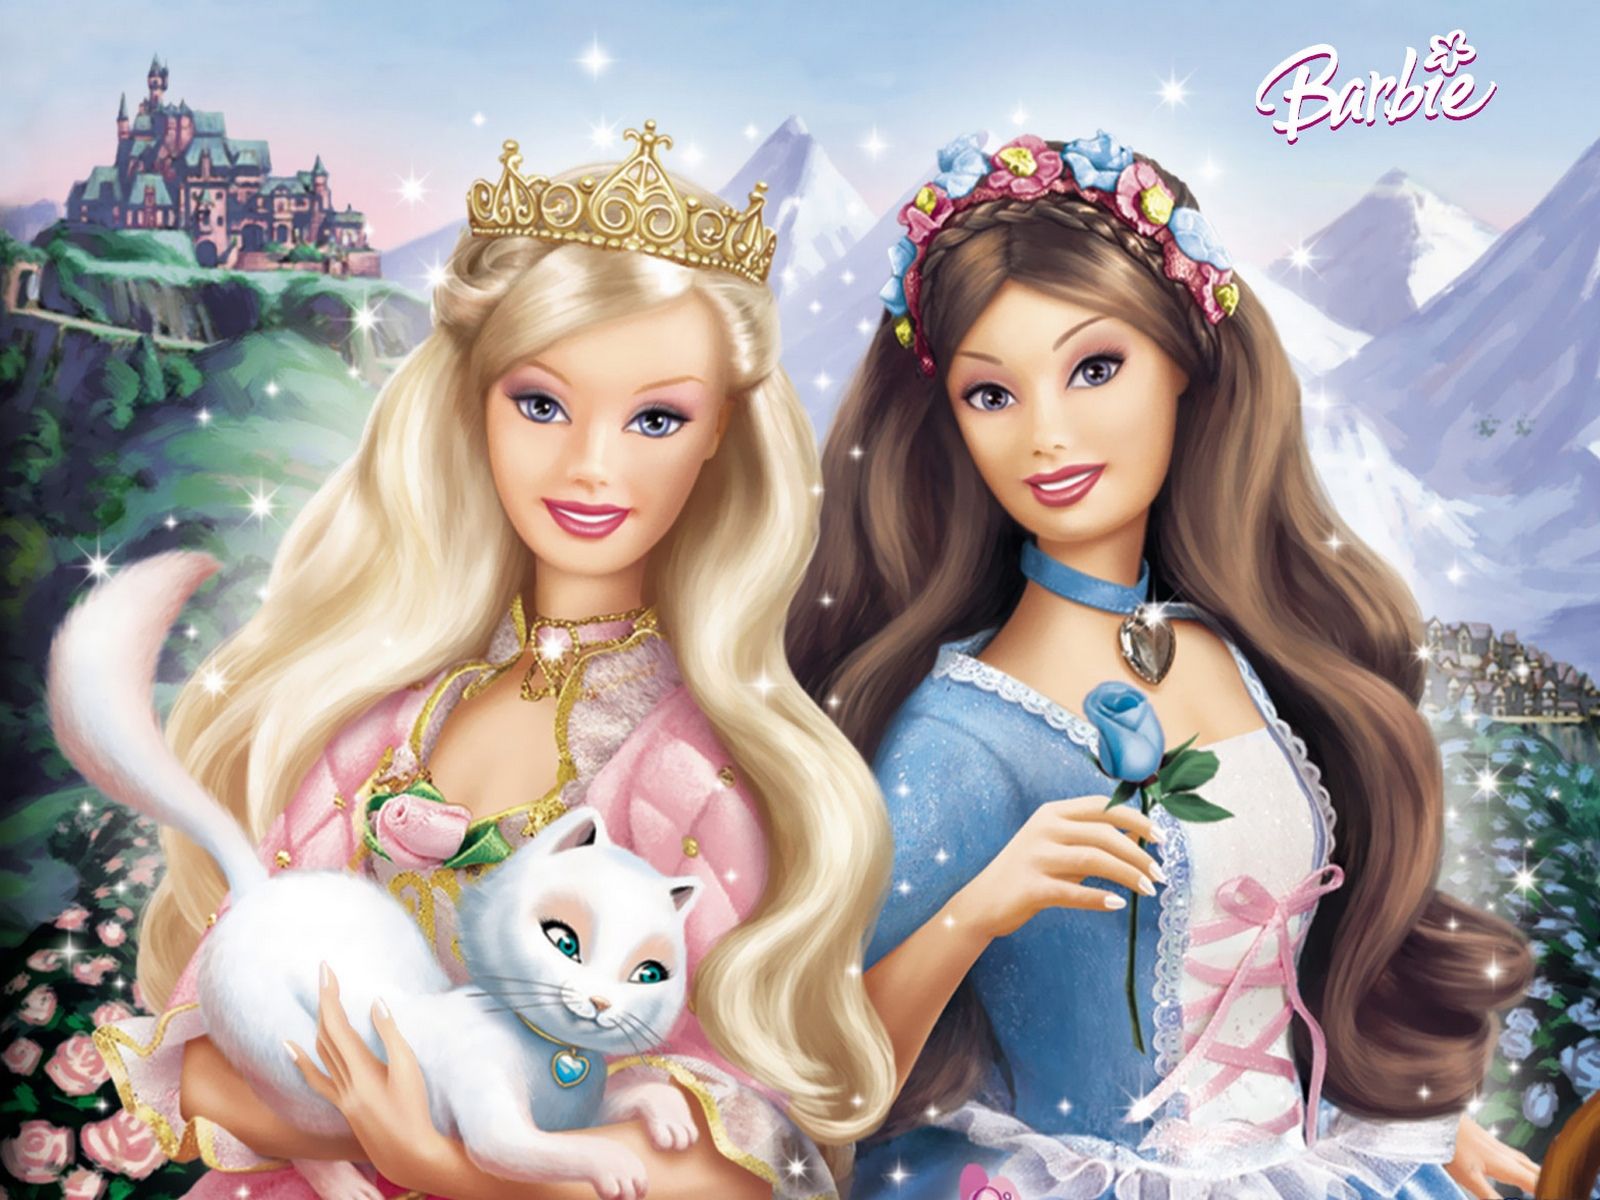 Barbie free Wallpapers 10 photos for your desktop, download pictures